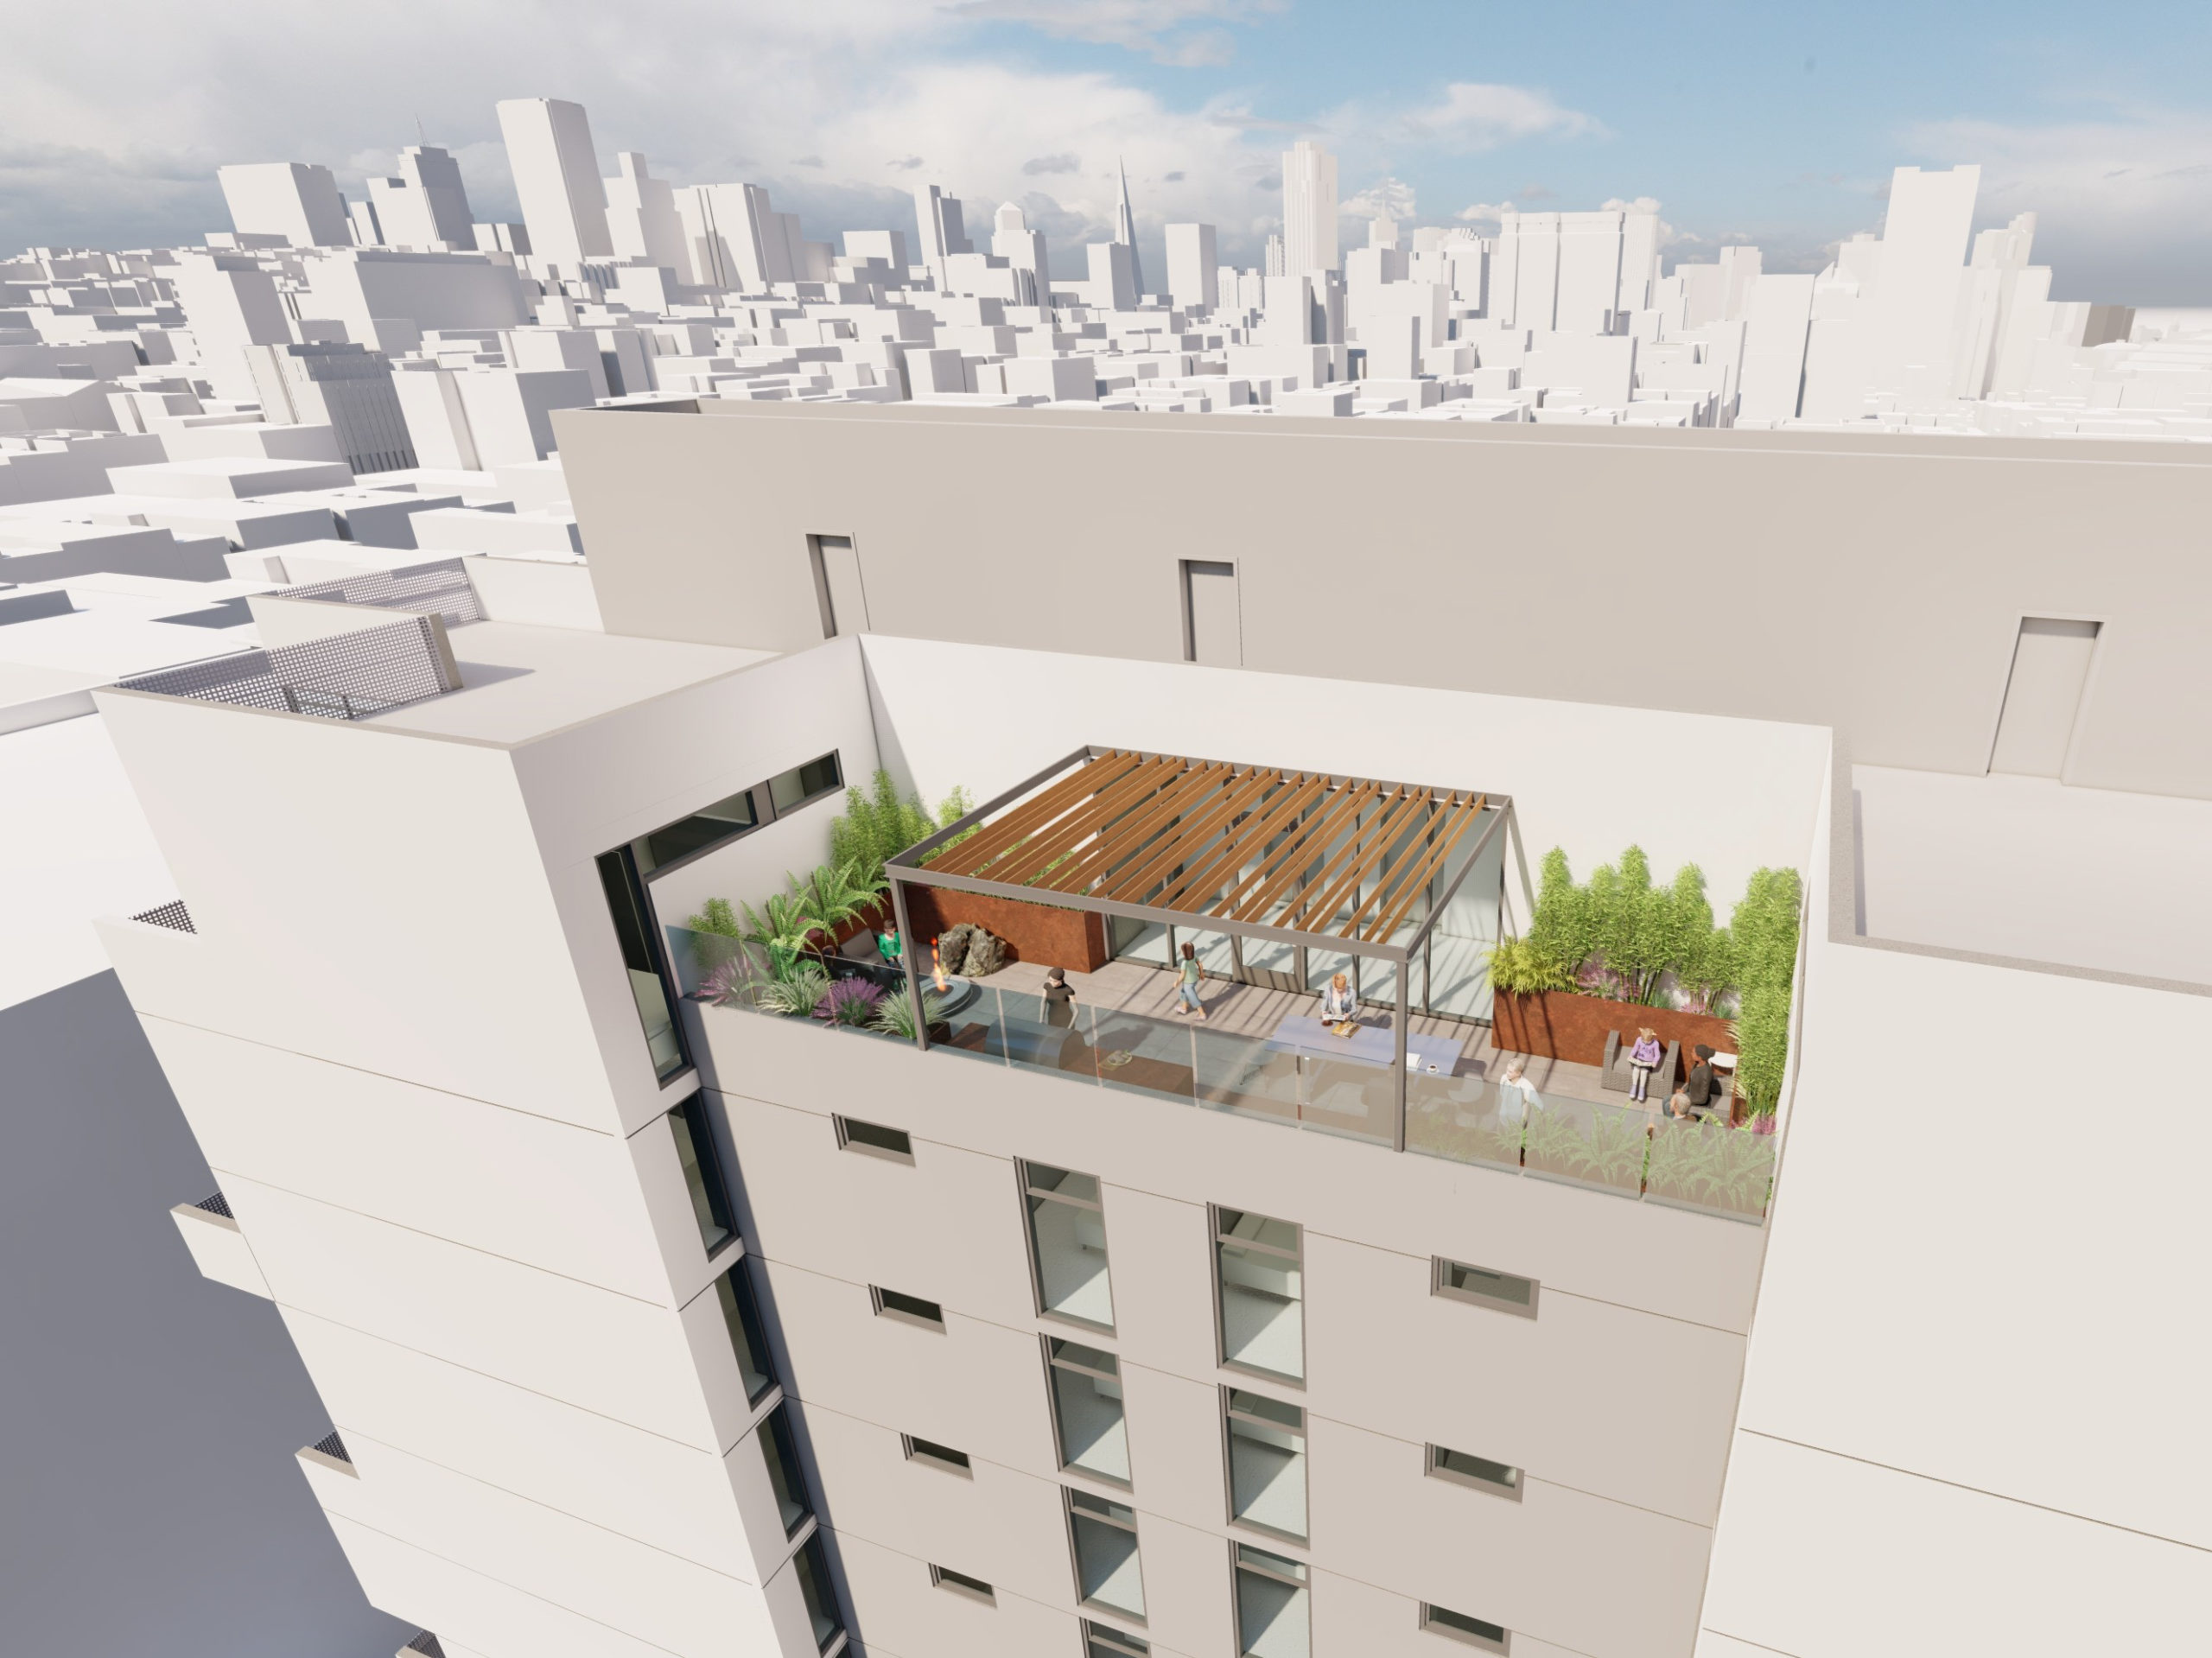 921 O'Farrell Street roof deck aerial view, rendering courtesy David Baker Architects